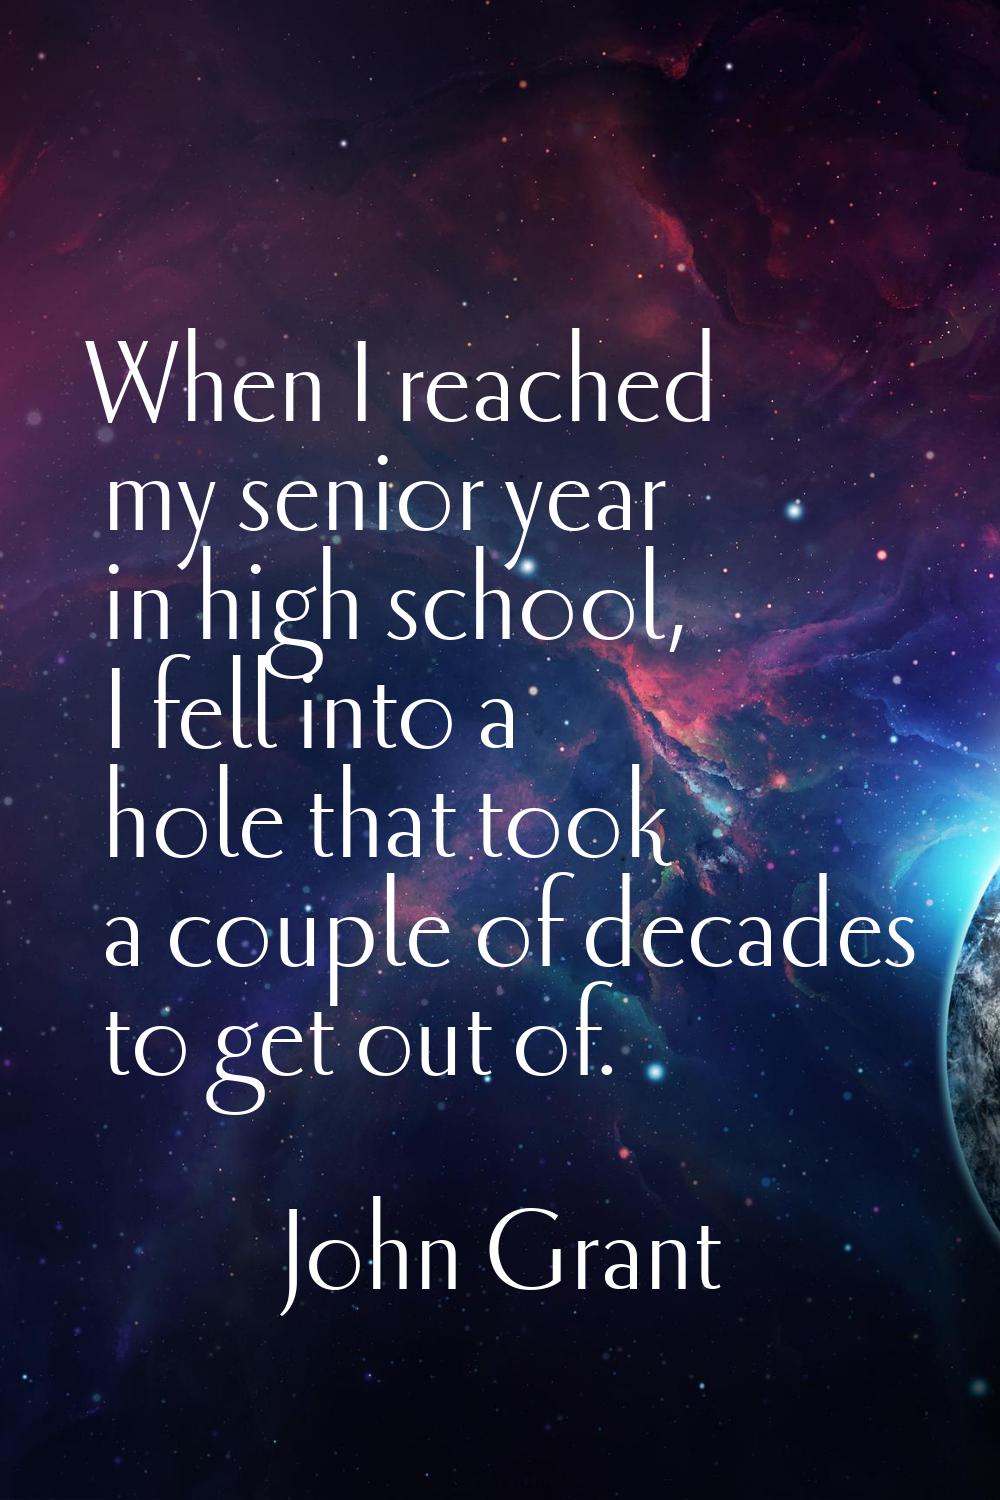 When I reached my senior year in high school, I fell into a hole that took a couple of decades to g